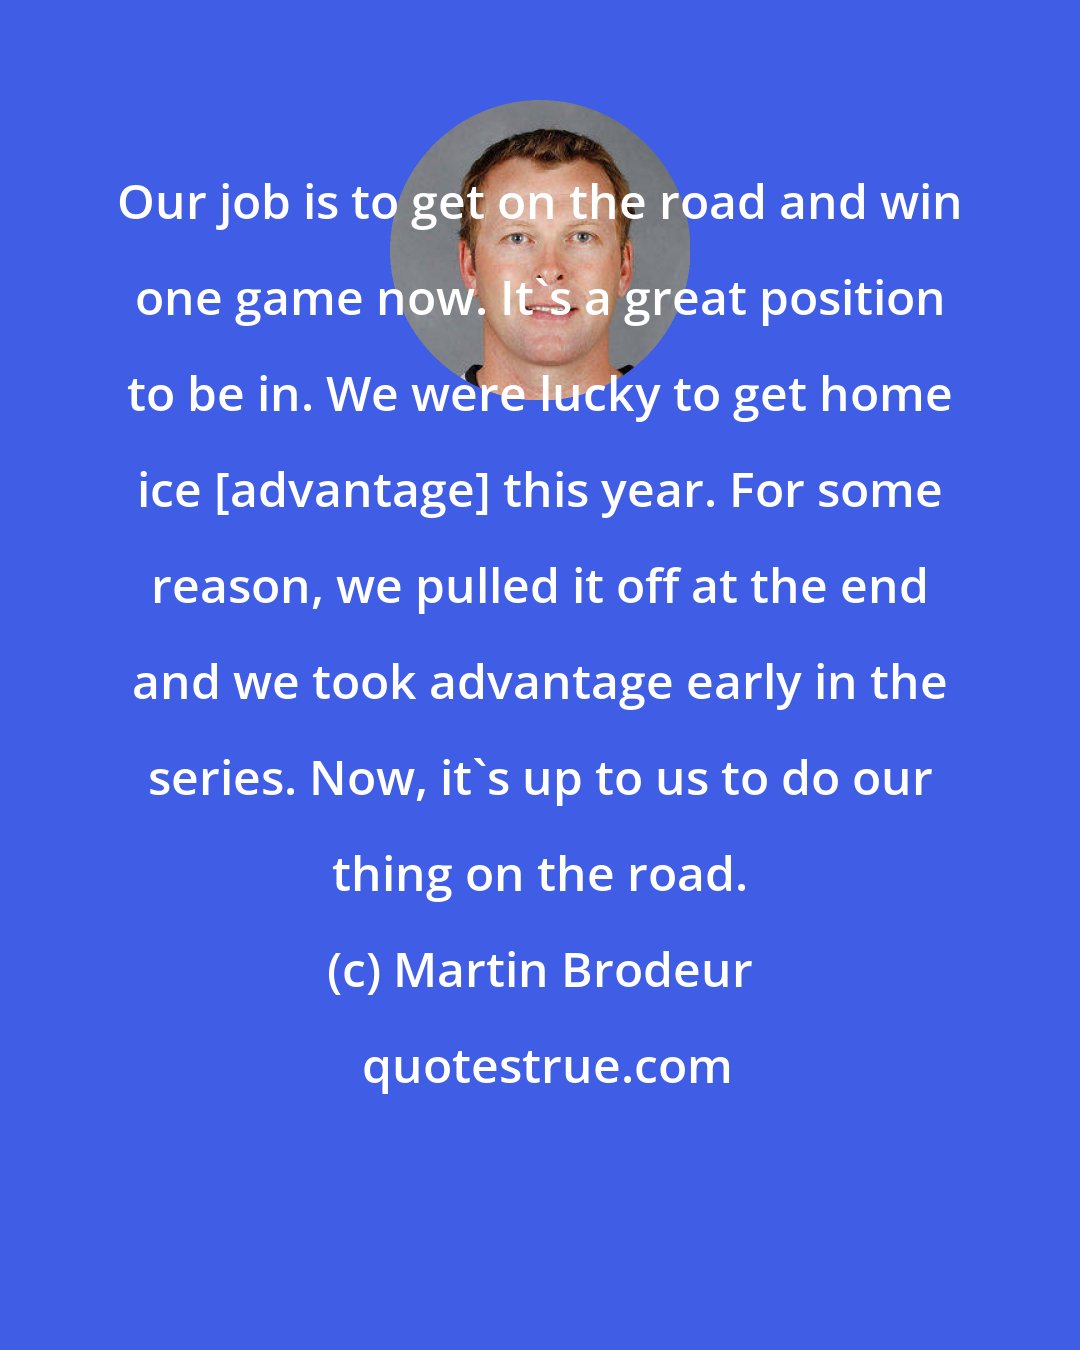 Martin Brodeur: Our job is to get on the road and win one game now. It's a great position to be in. We were lucky to get home ice [advantage] this year. For some reason, we pulled it off at the end and we took advantage early in the series. Now, it's up to us to do our thing on the road.